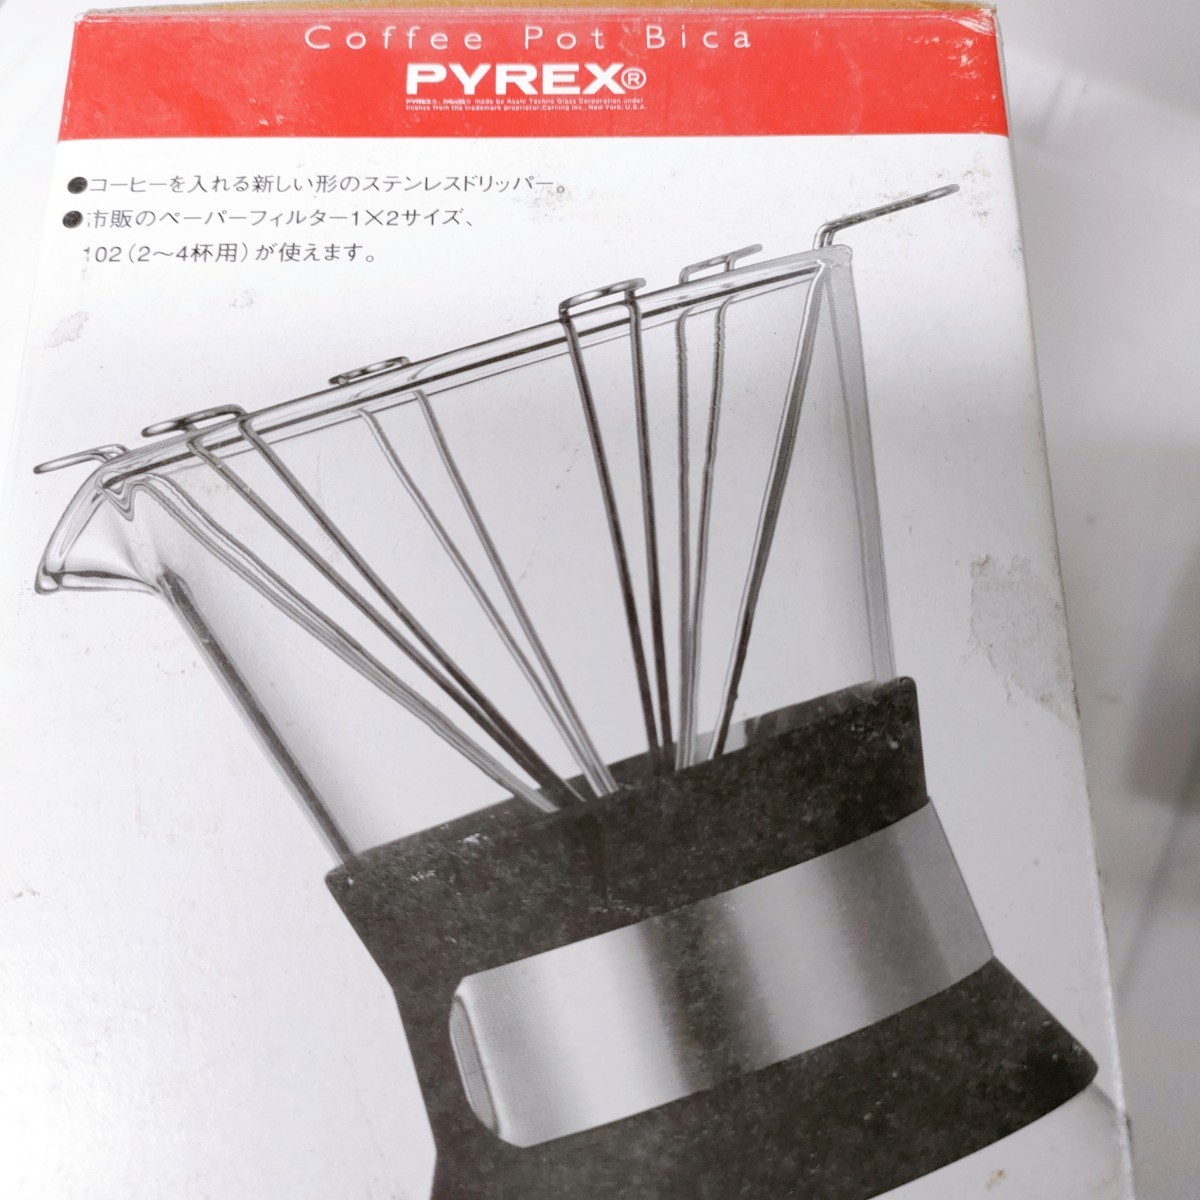 ST11] Pyrex coffee pot bika stainless steel dripper PYREX heat-resisting glass tableware . hot water for i armpit 120*C Cafe water 